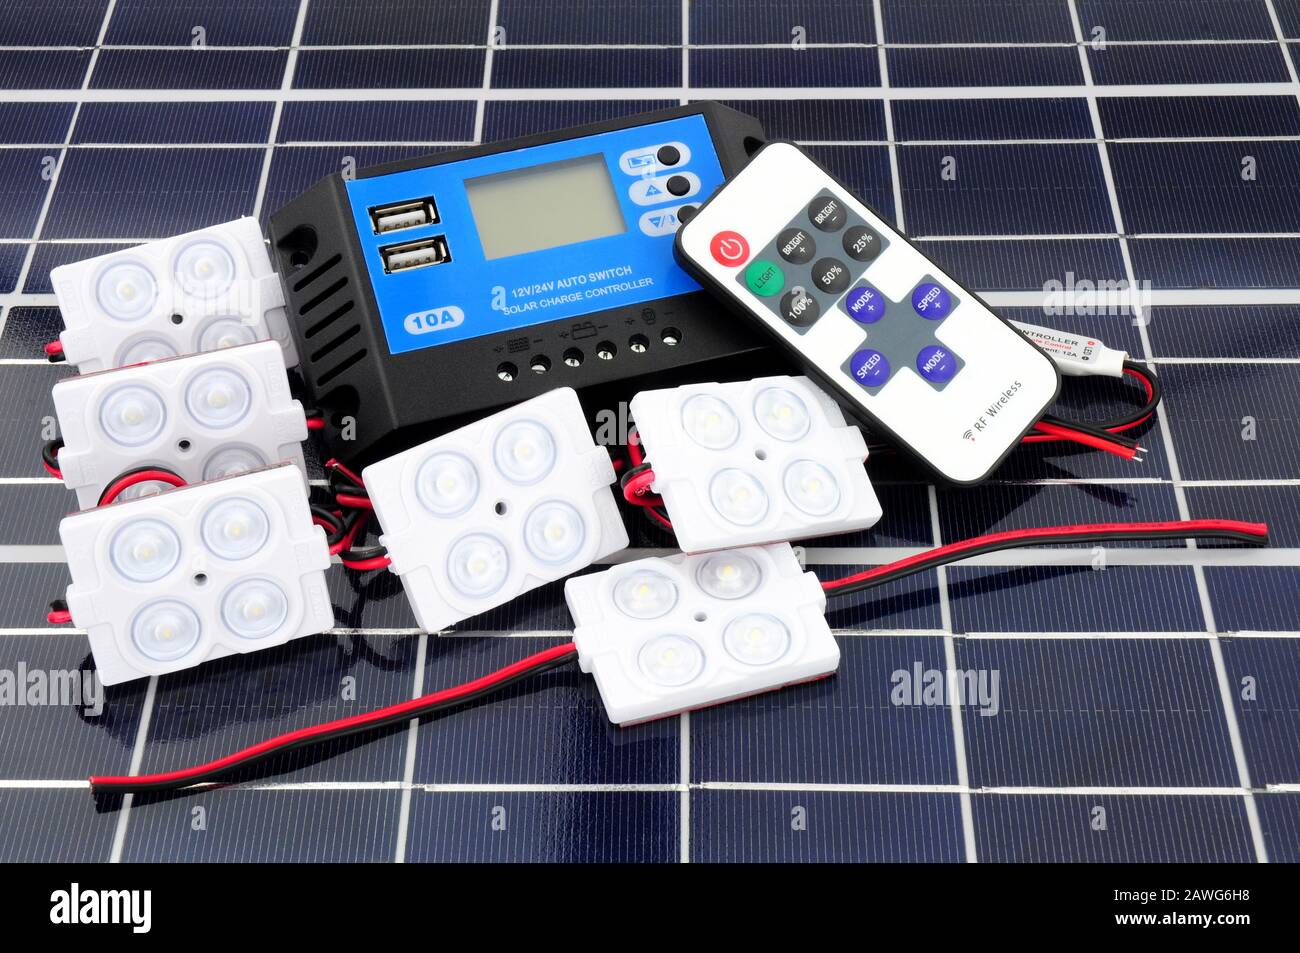 Solar lighting kit with lights and charger control unit and remote control on a solar panel background Stock Photo